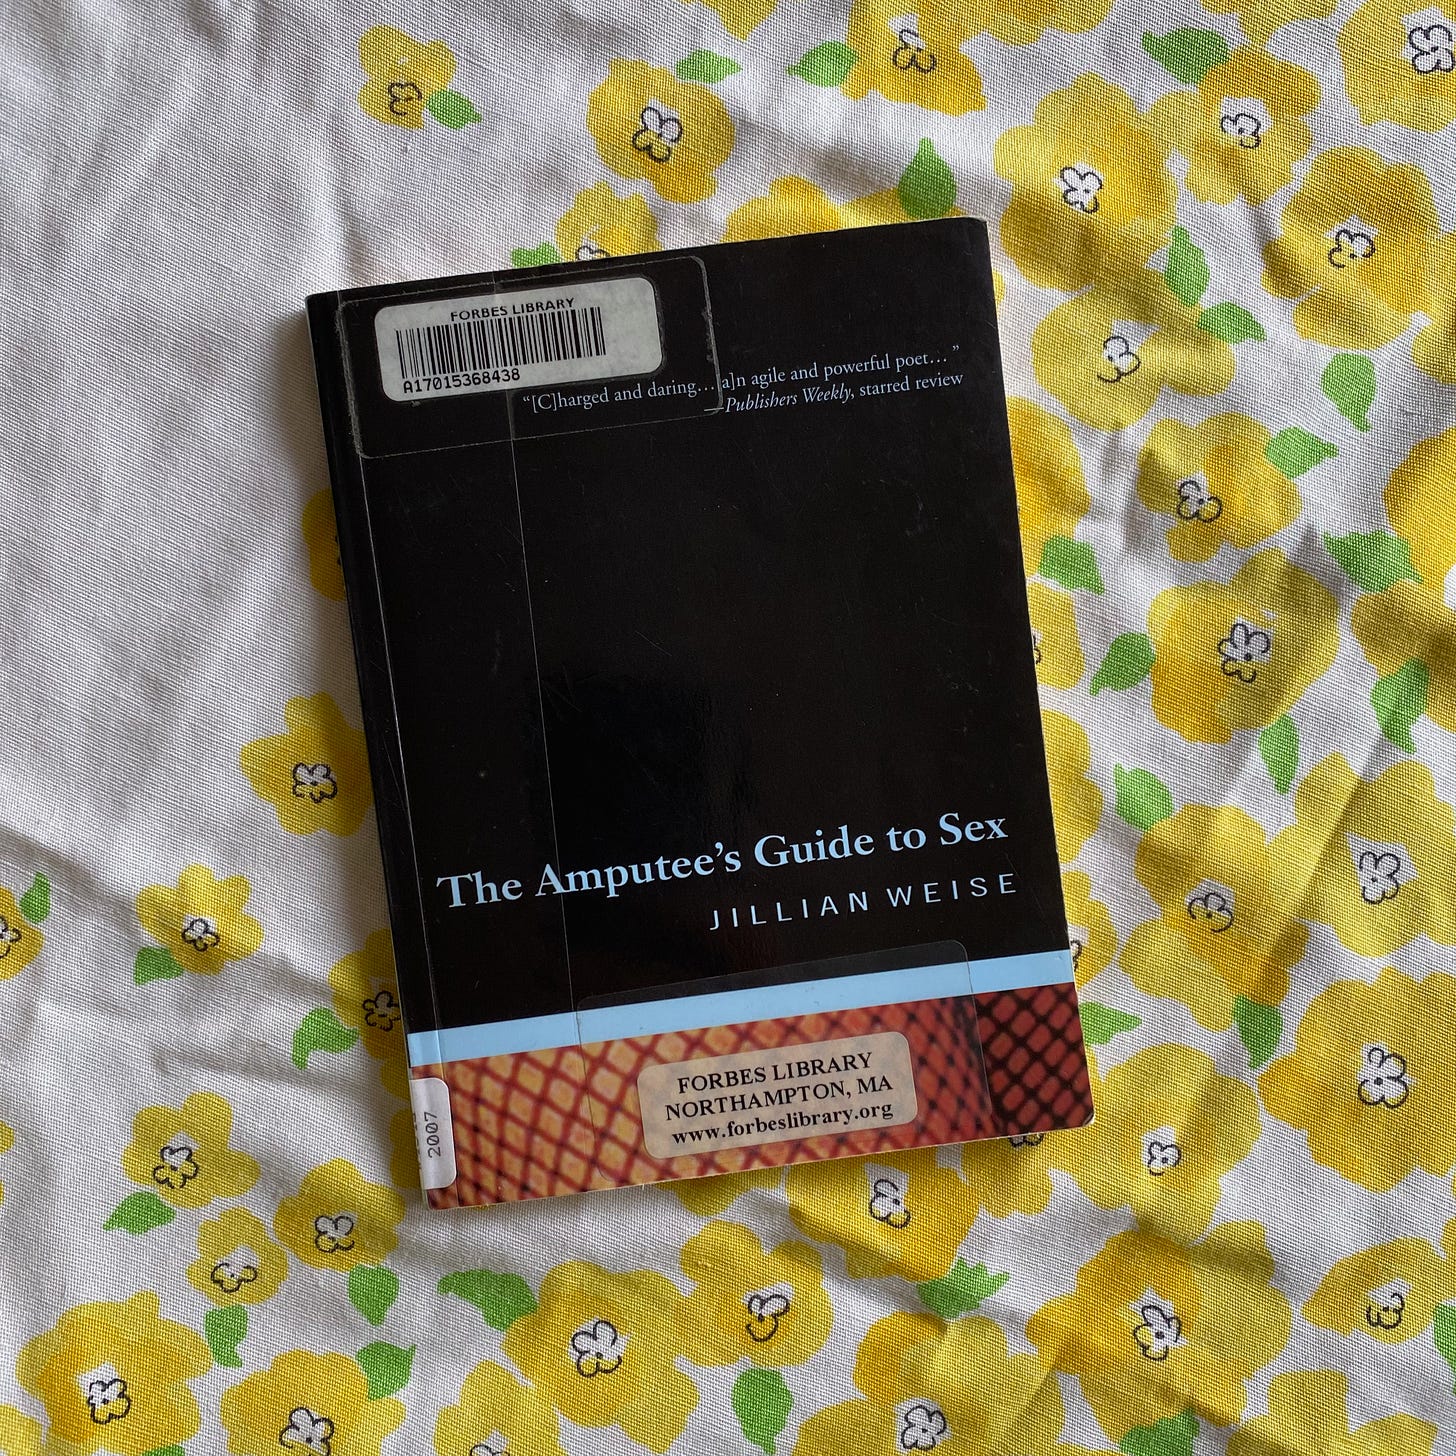 This book on a tablecloth patterned with yellow flowers.